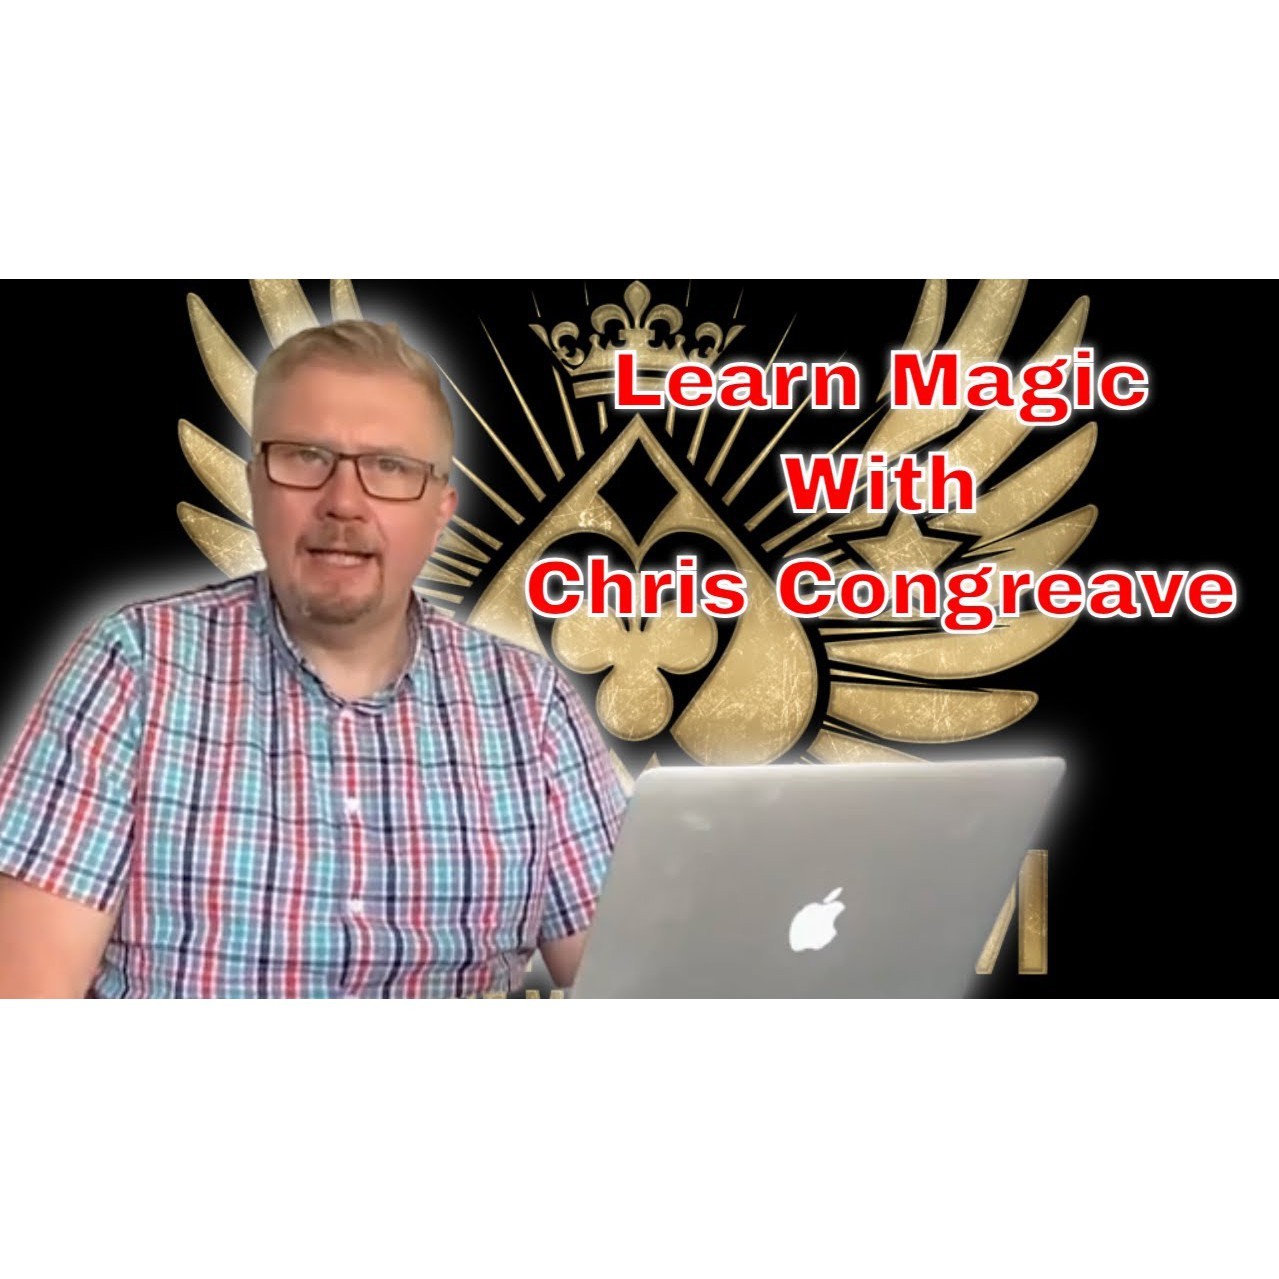 Alakazam Online Magic Academy - One More Thing The Chris Congrea